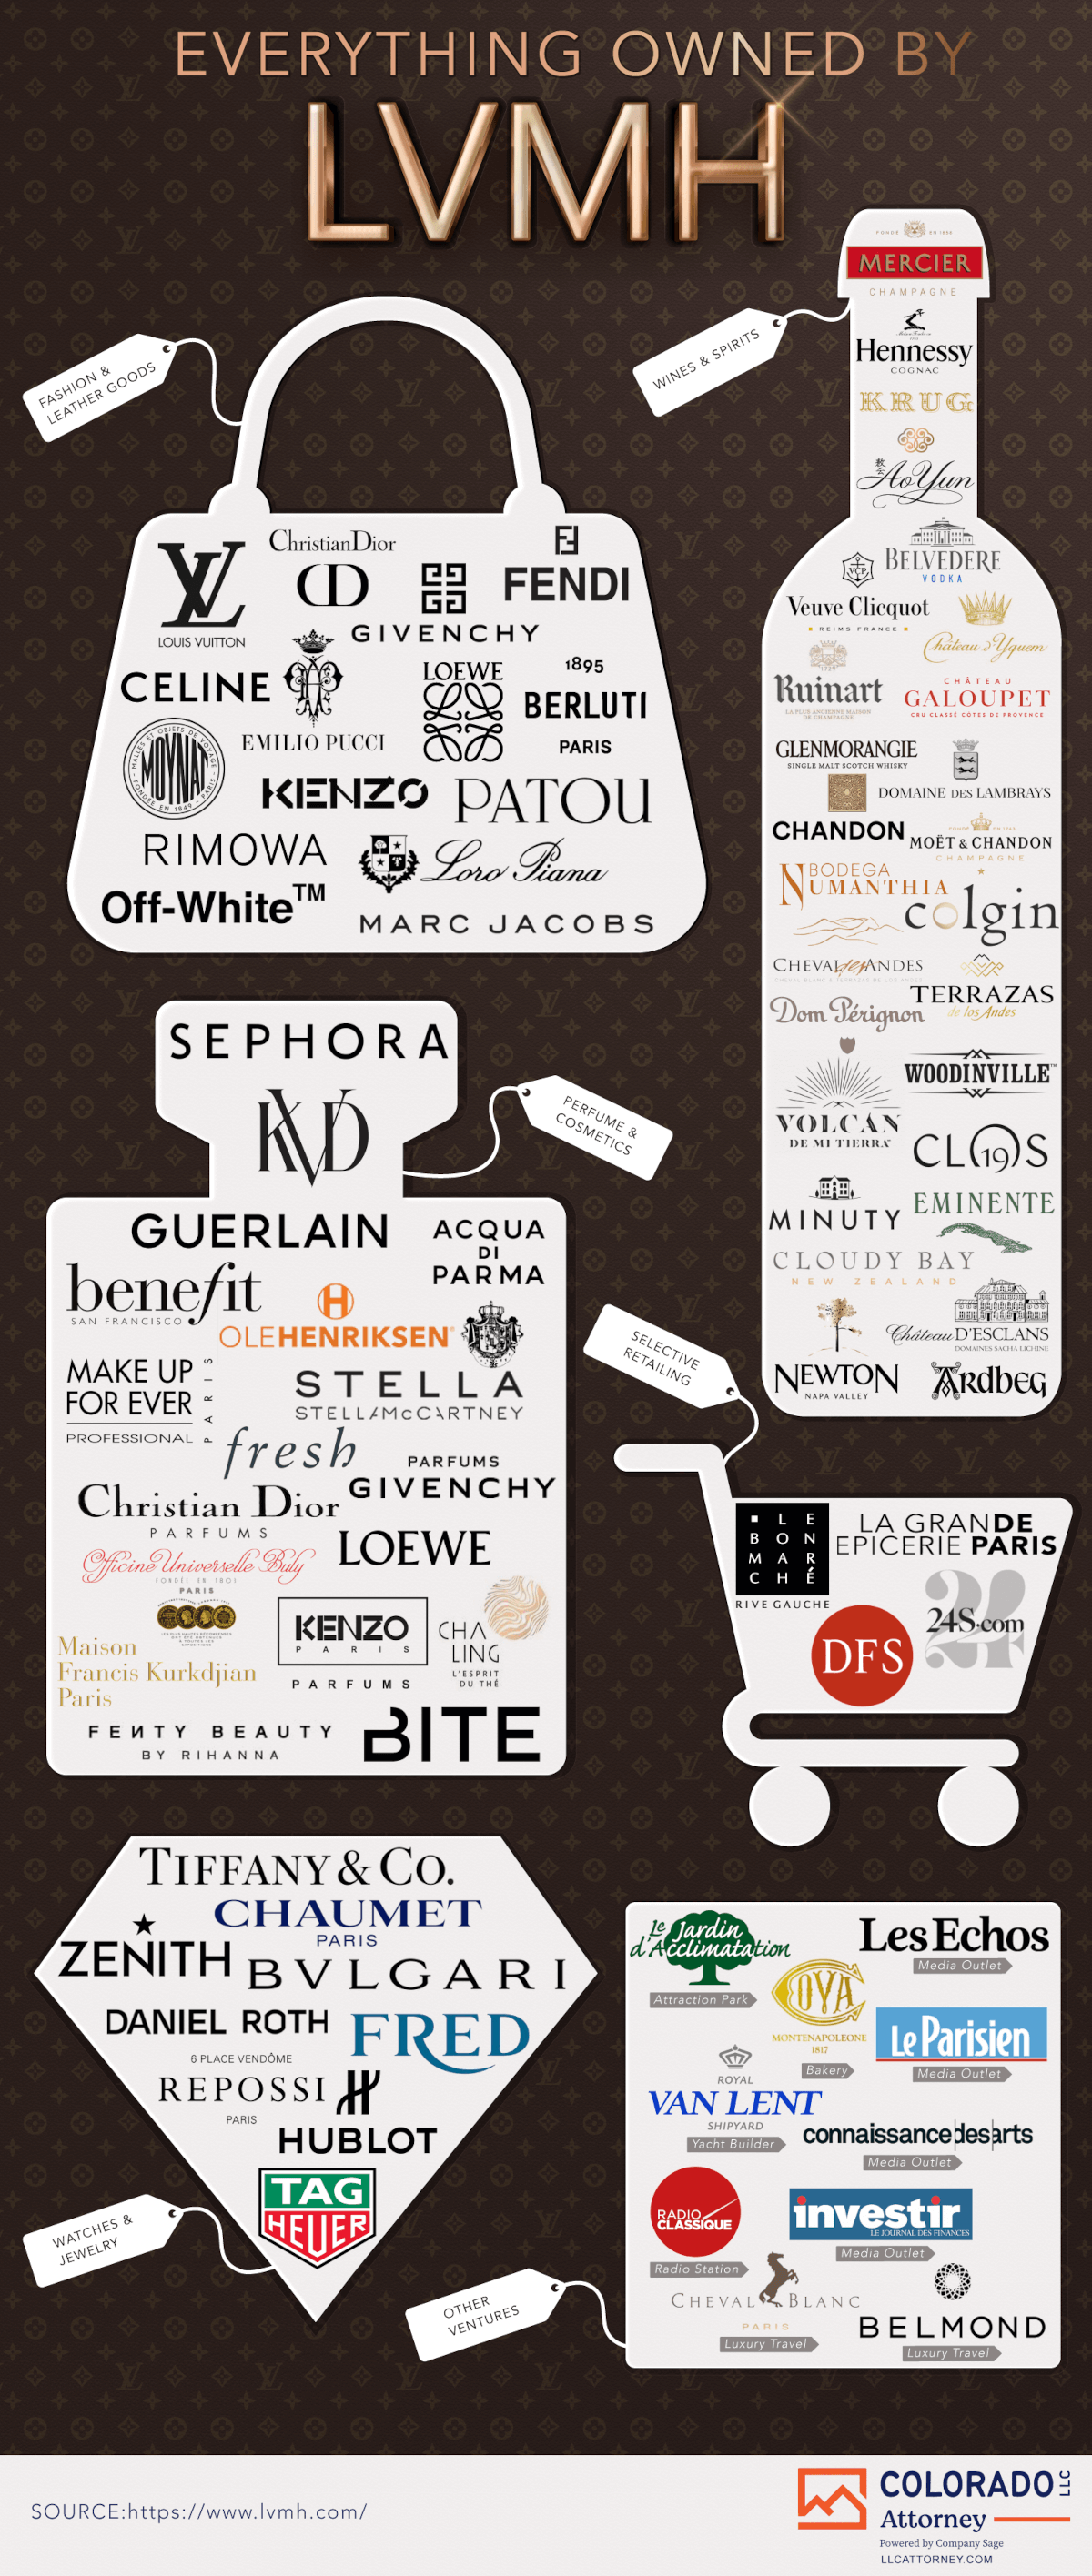 Everything Owned by LVMH - LLCAttorney.com - Infographic